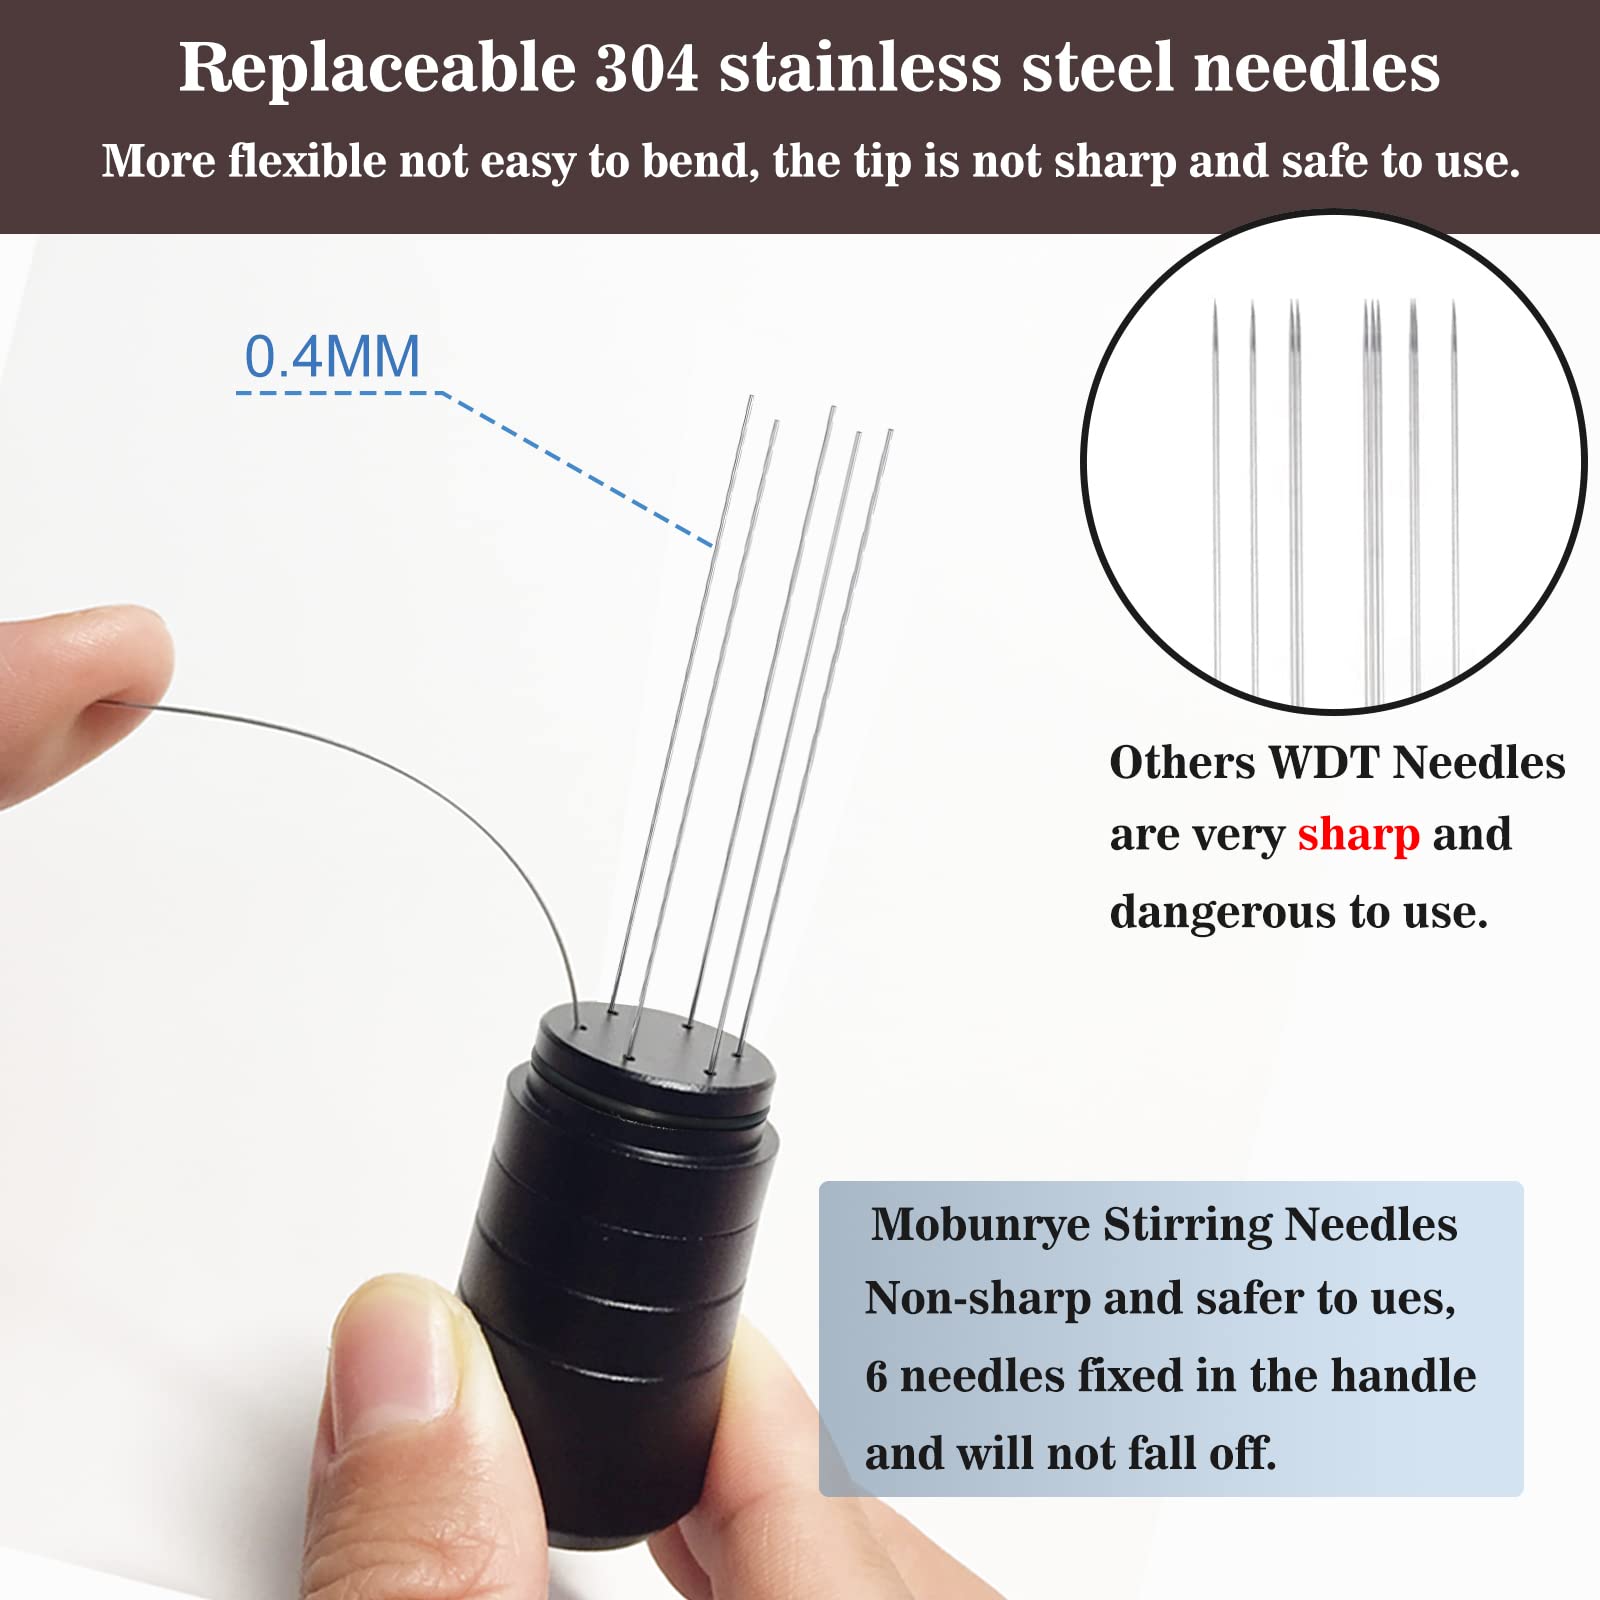 Mobunrye WDT Tool, Espresso Distribution Tool for Barista, 0.4mm Stainless Steel Needles Espresso Stirrer, Portable WDT Tool Espresso with Stand, Replacement Extra 6 Needles(Matte Black)